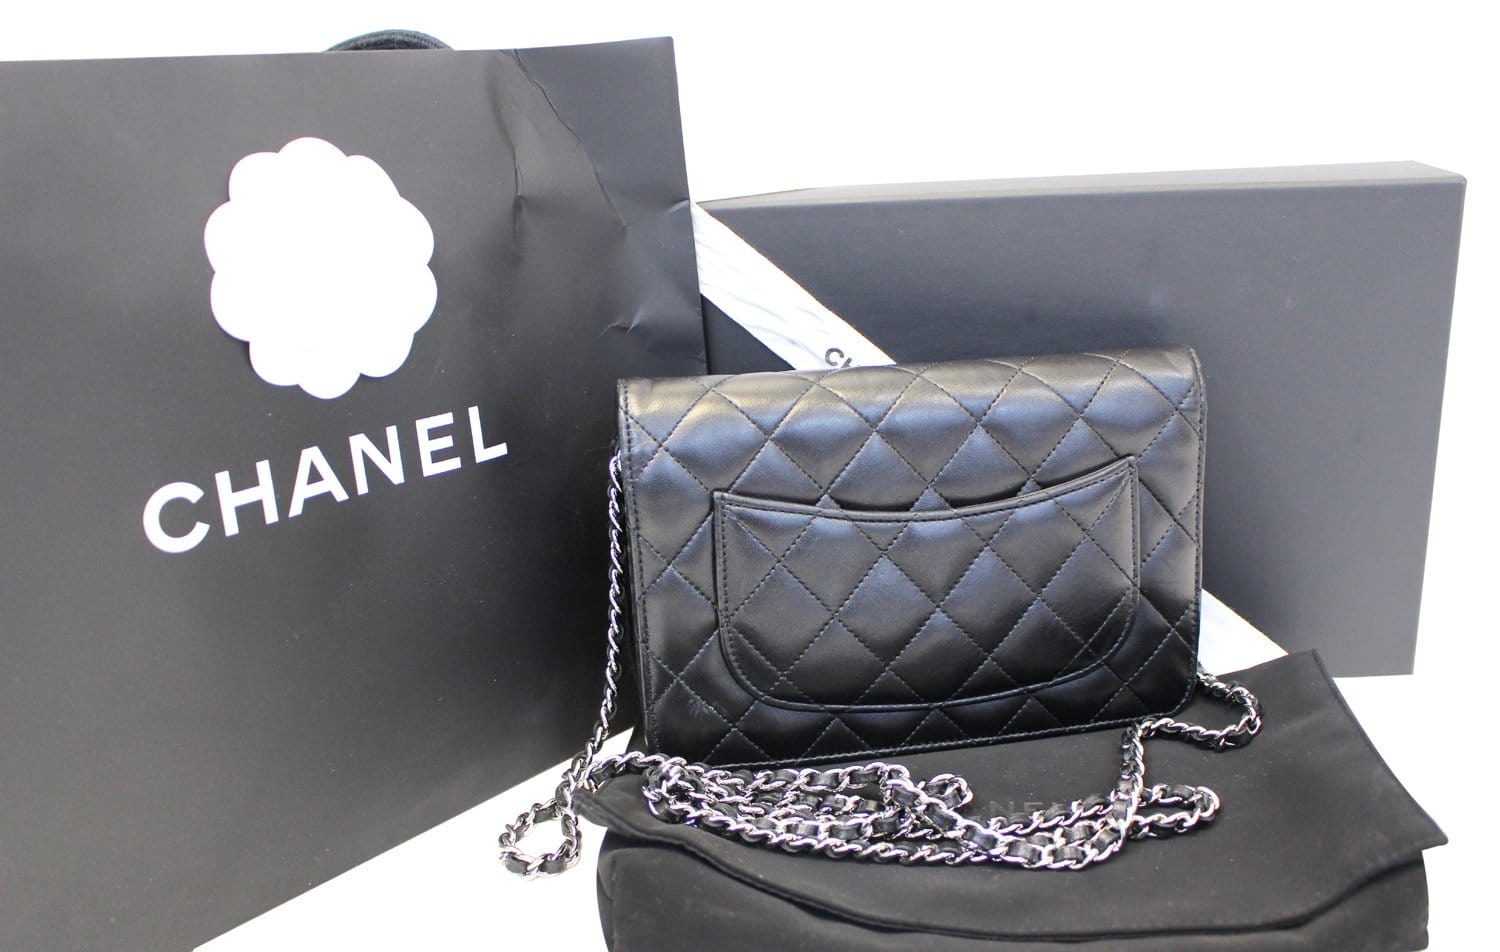 Chanel Pearl Wallet On Chain Leather Crossbody Bag